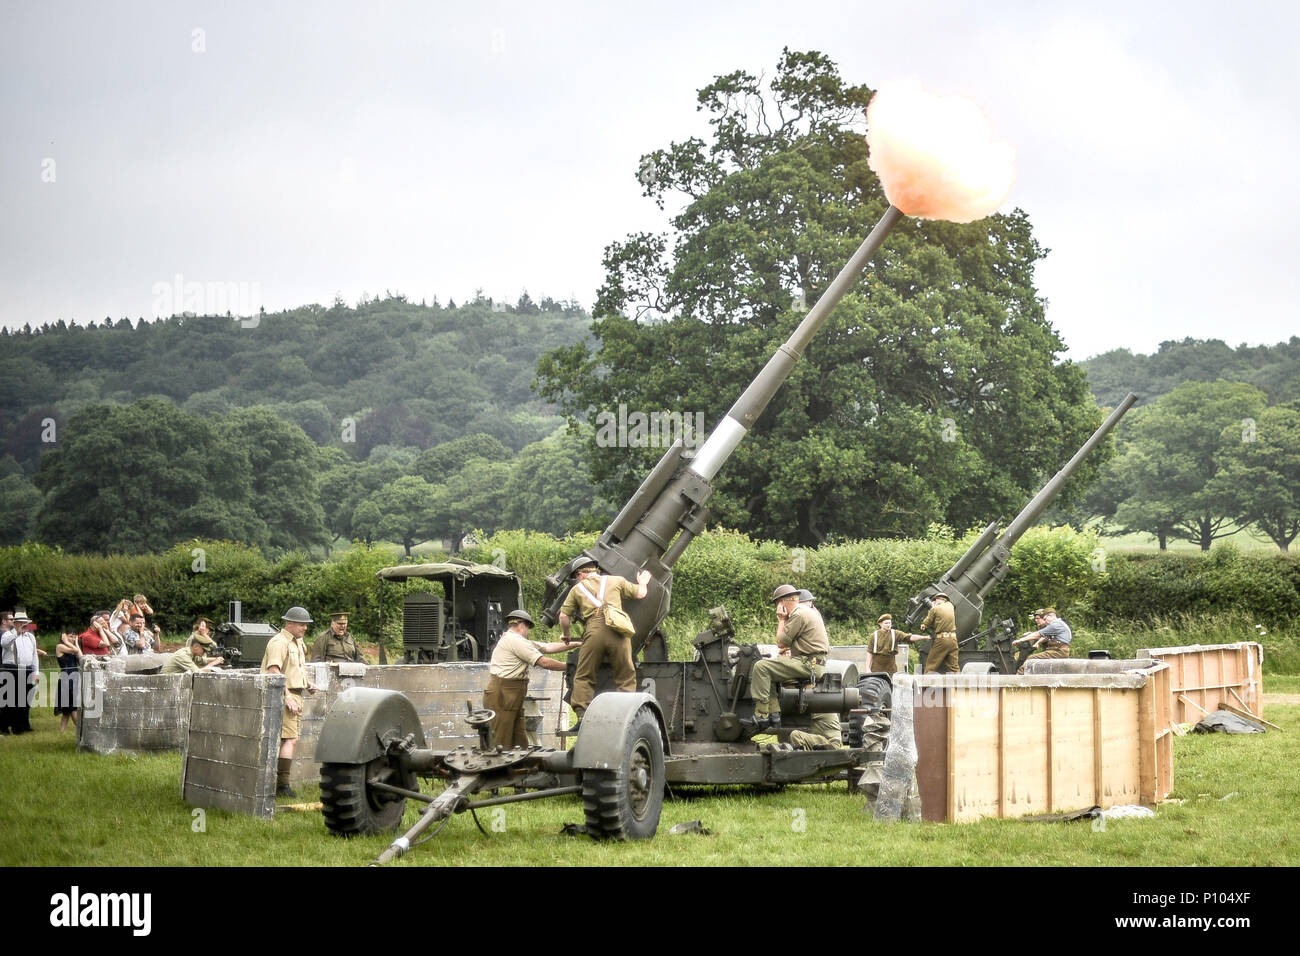 Men dressed as WWII soldiers fire anti-aircraft guns during an air-raid firing demonstration at the Dig for Victory Show, a festival that celebrates the 1940's, at the North Somerset Ground, Wraxall, Somerset. Stock Photo